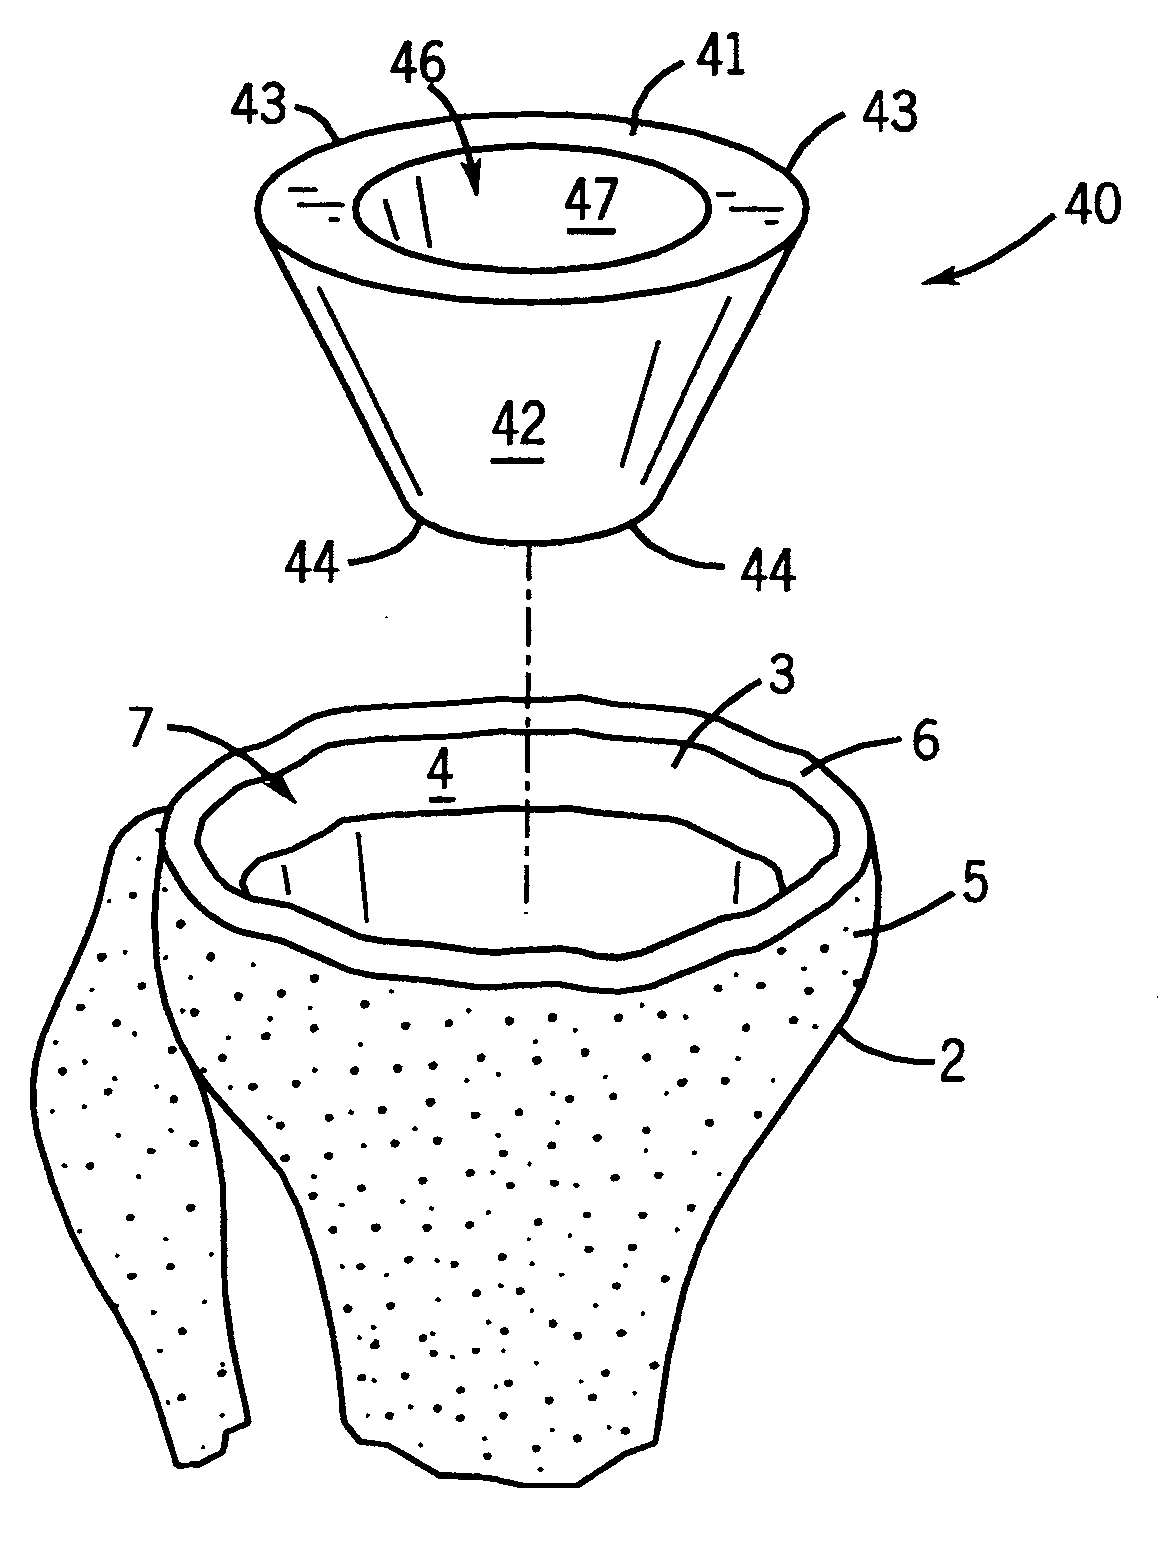 Prosthetic implant support structure